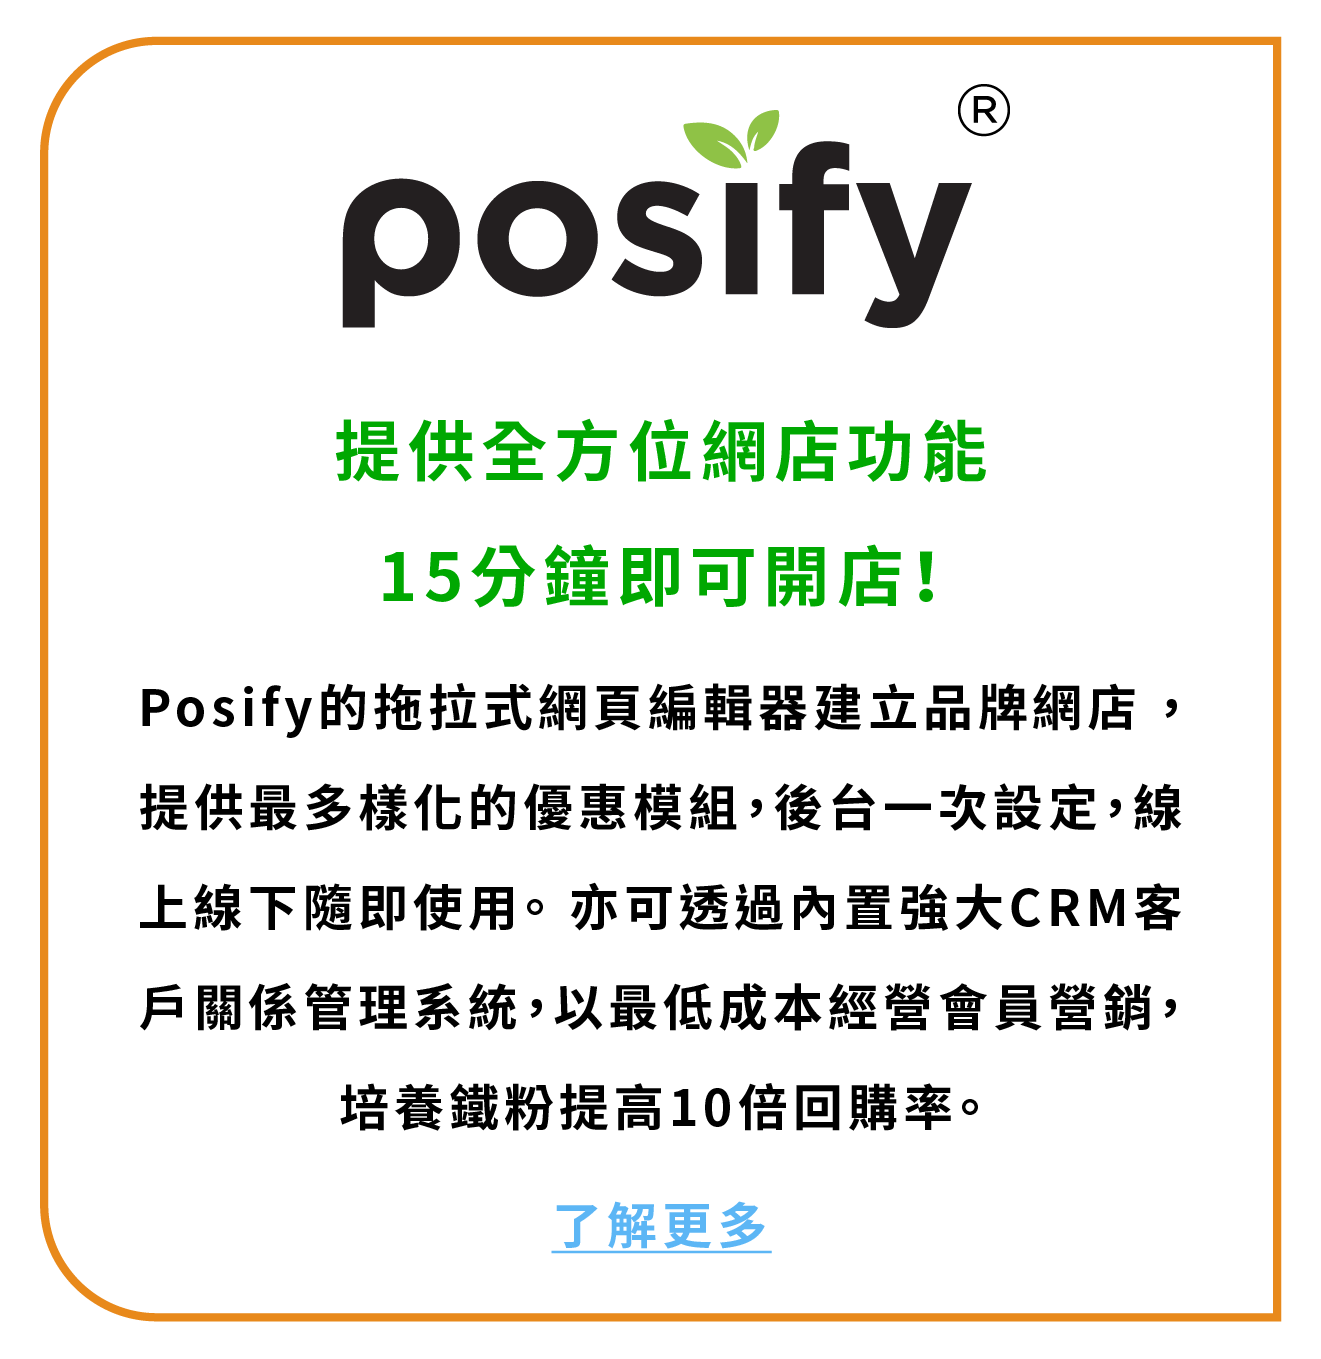 Posify offers a full range of online store features